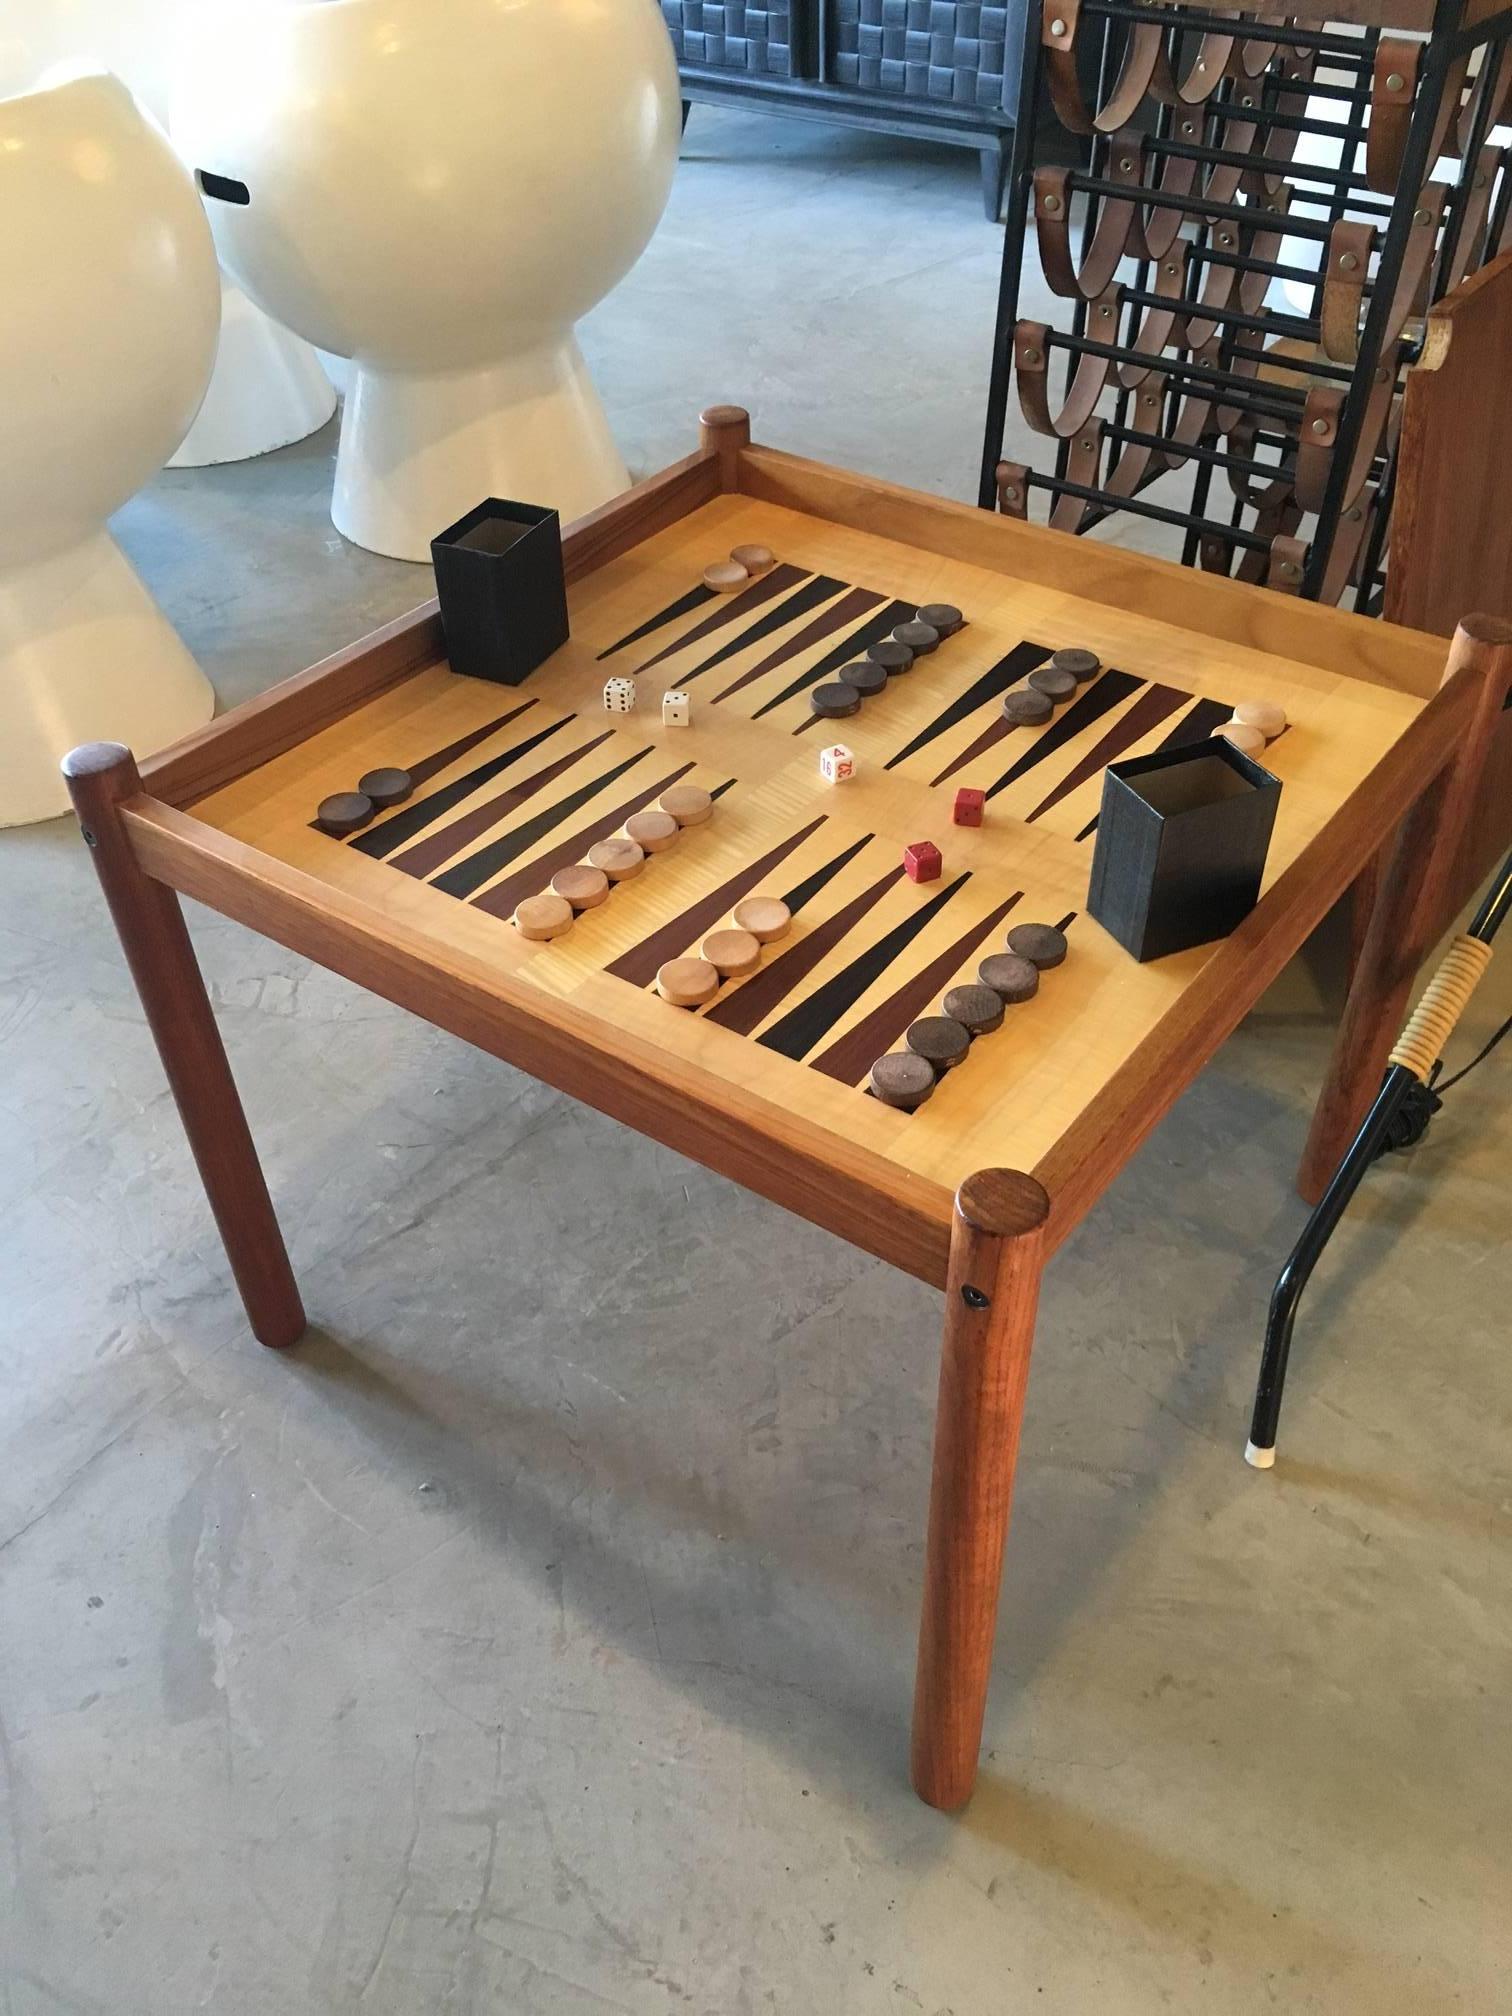 Excellent teak backgammon game table. Made in Denmark by Georg Petersens. Original label underneath. Backgammon table or chess board and finished side as well. Perfect side table between two club chairs. Big enough to be a standalone backgammon